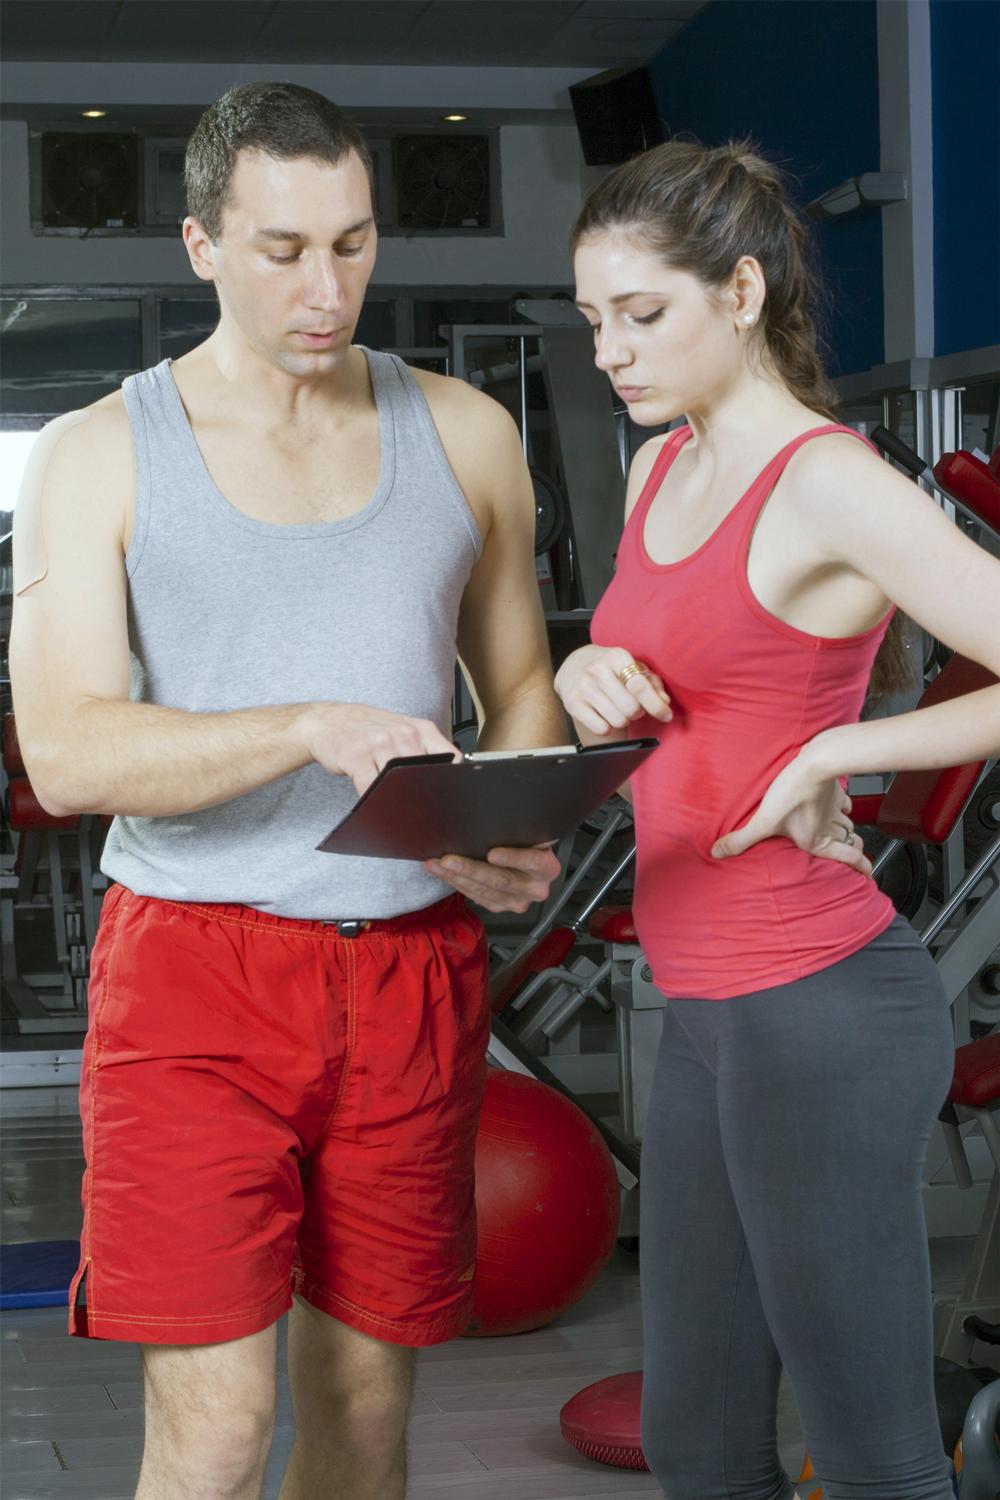 Most issues could be resolved by gyms / Photo: Shutterstock.com